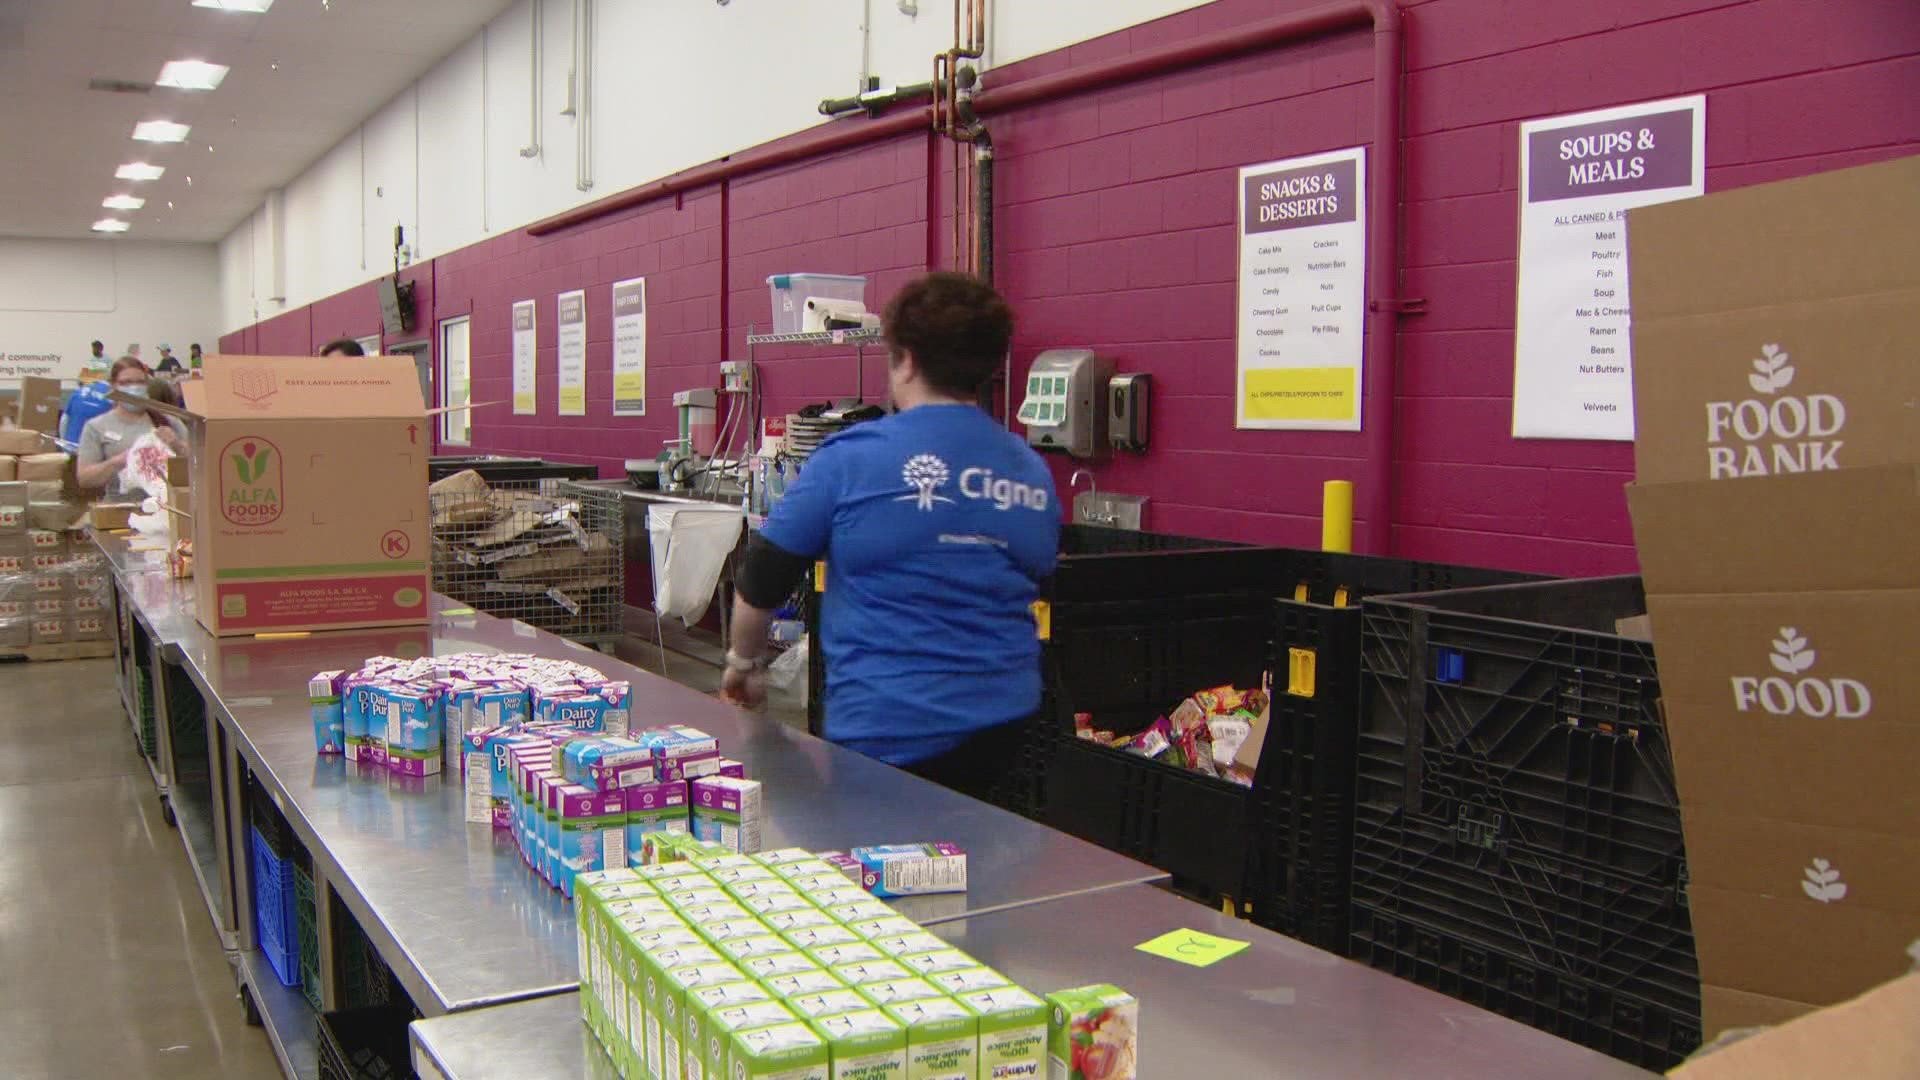 While they also accept most donations, Food Bank of the Rockies is able to do more with monetary donations since they have arrangements to buy food at cheaper prices